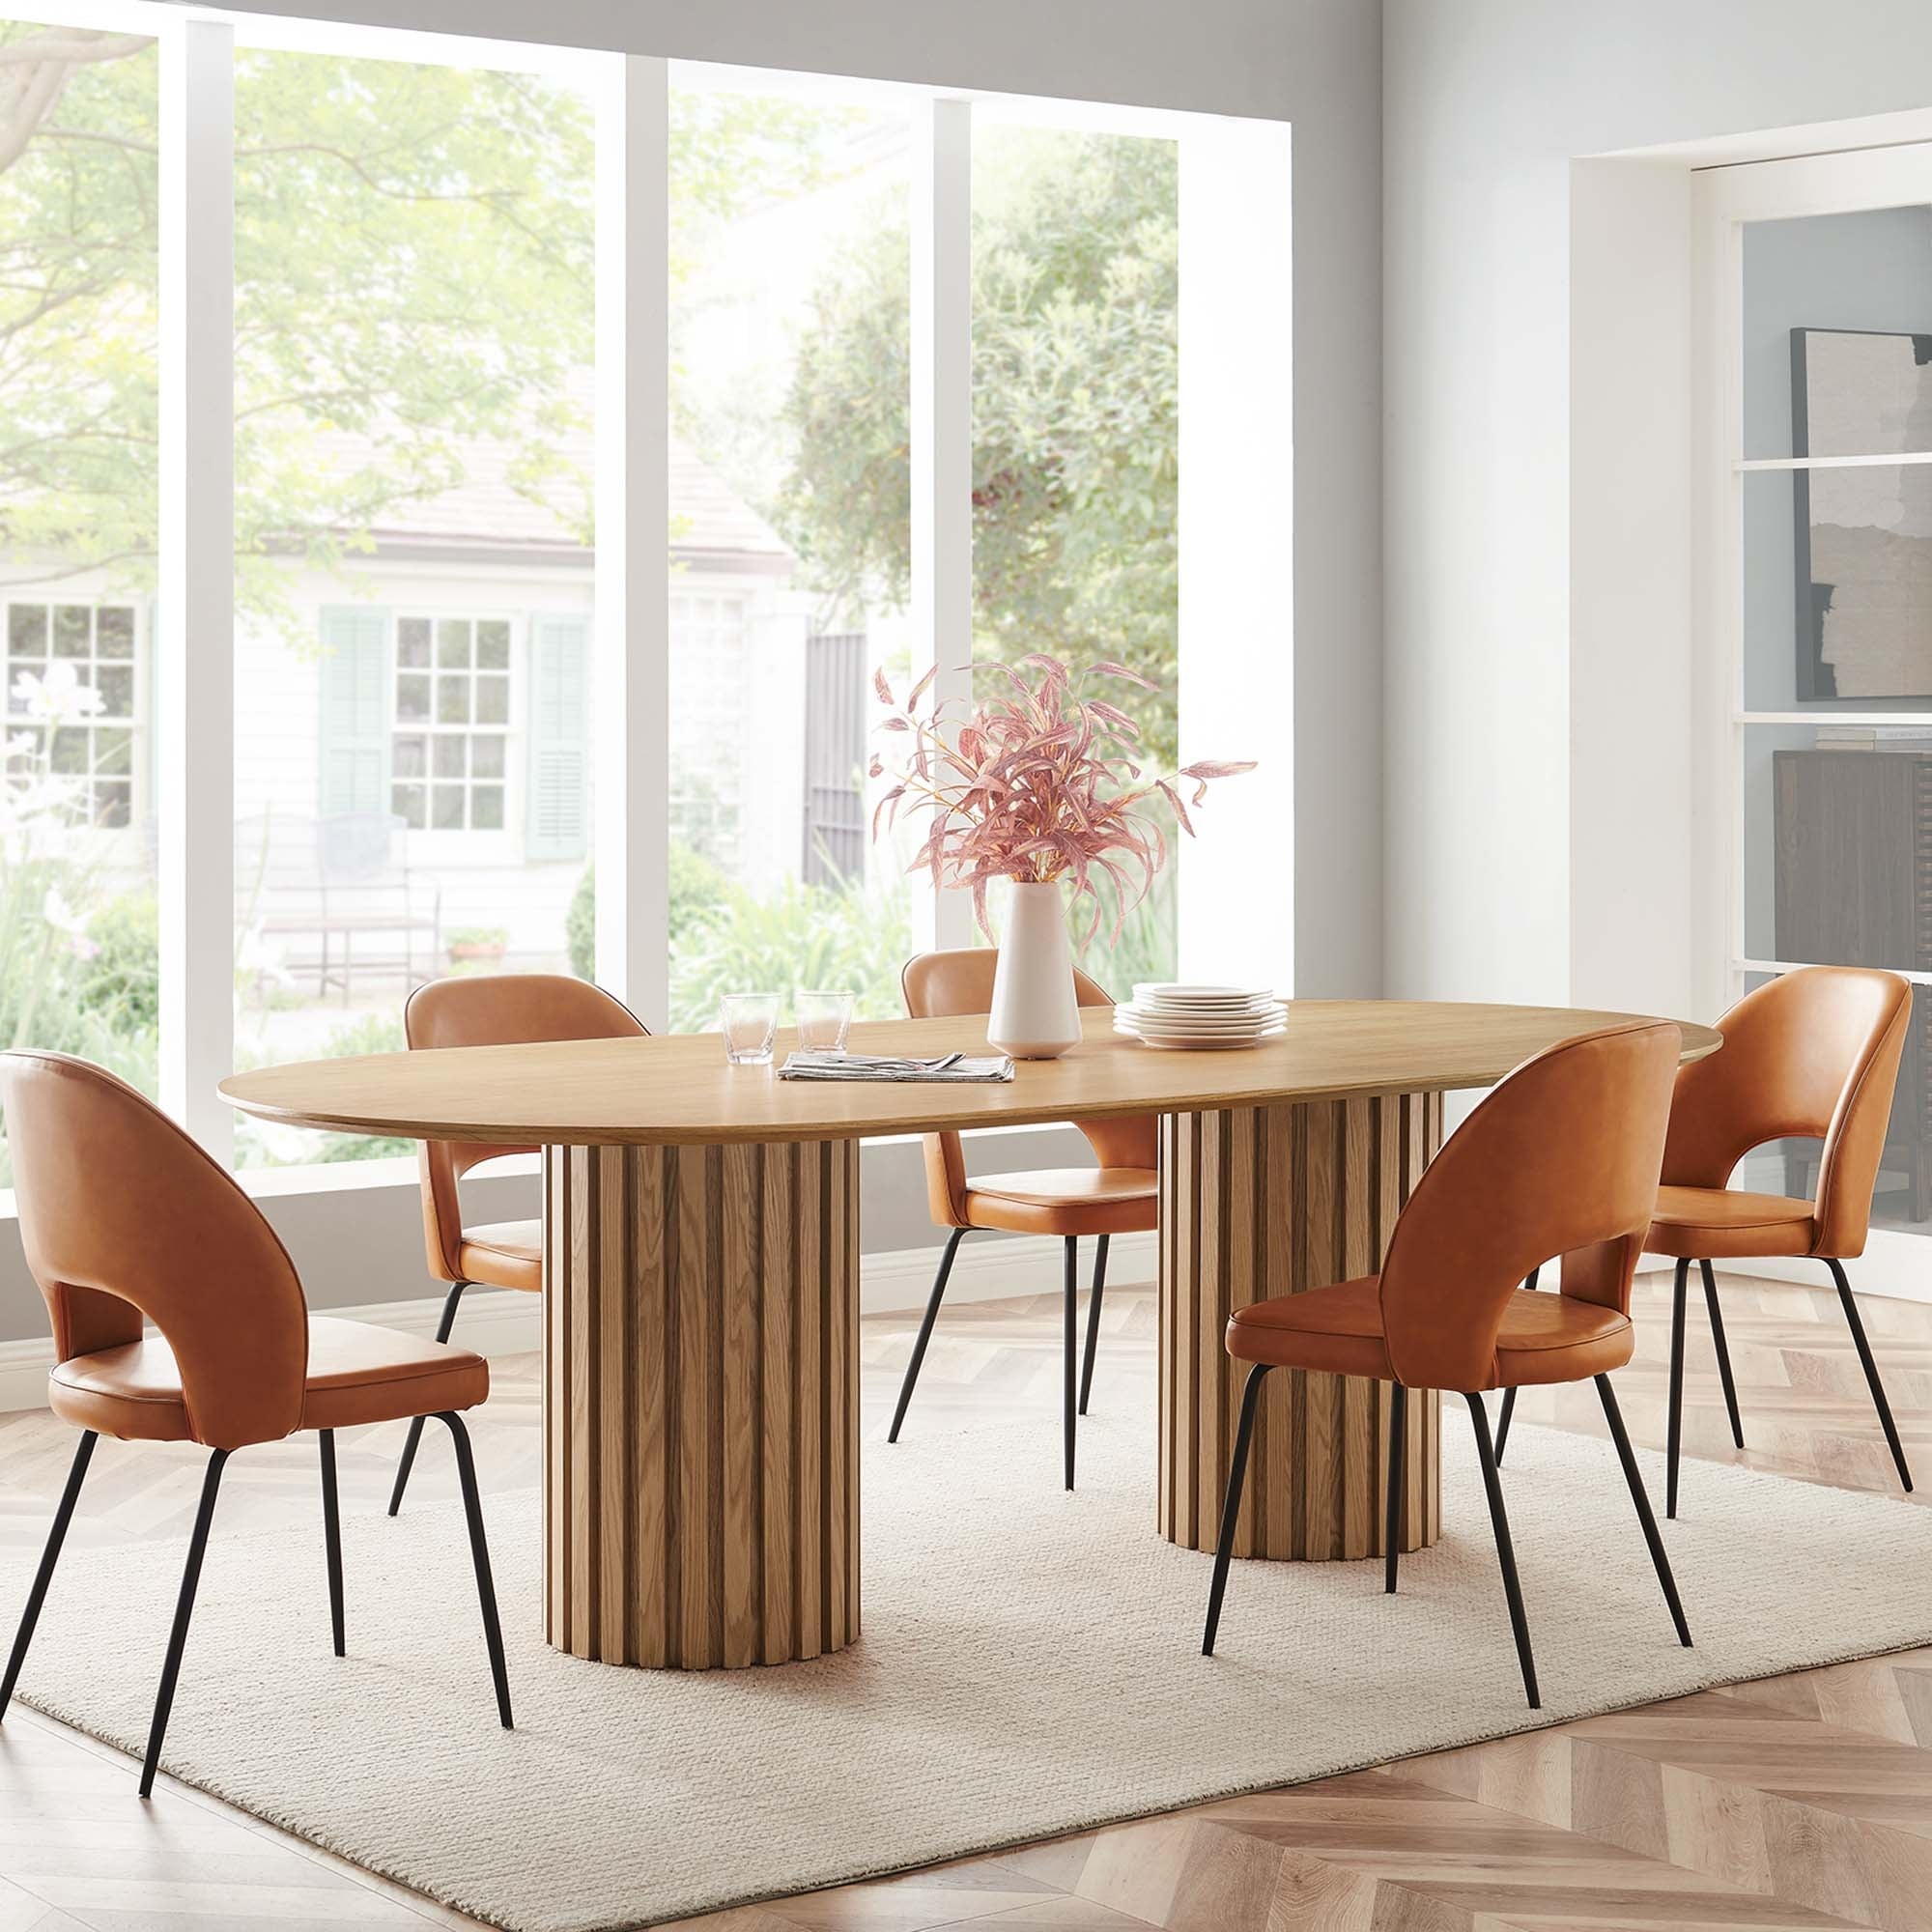 Progressive Furniture Inc Round Dining Set for 4 Mid-Century Modern - Natural Wood 47W x 47D 30H at Living Spaces